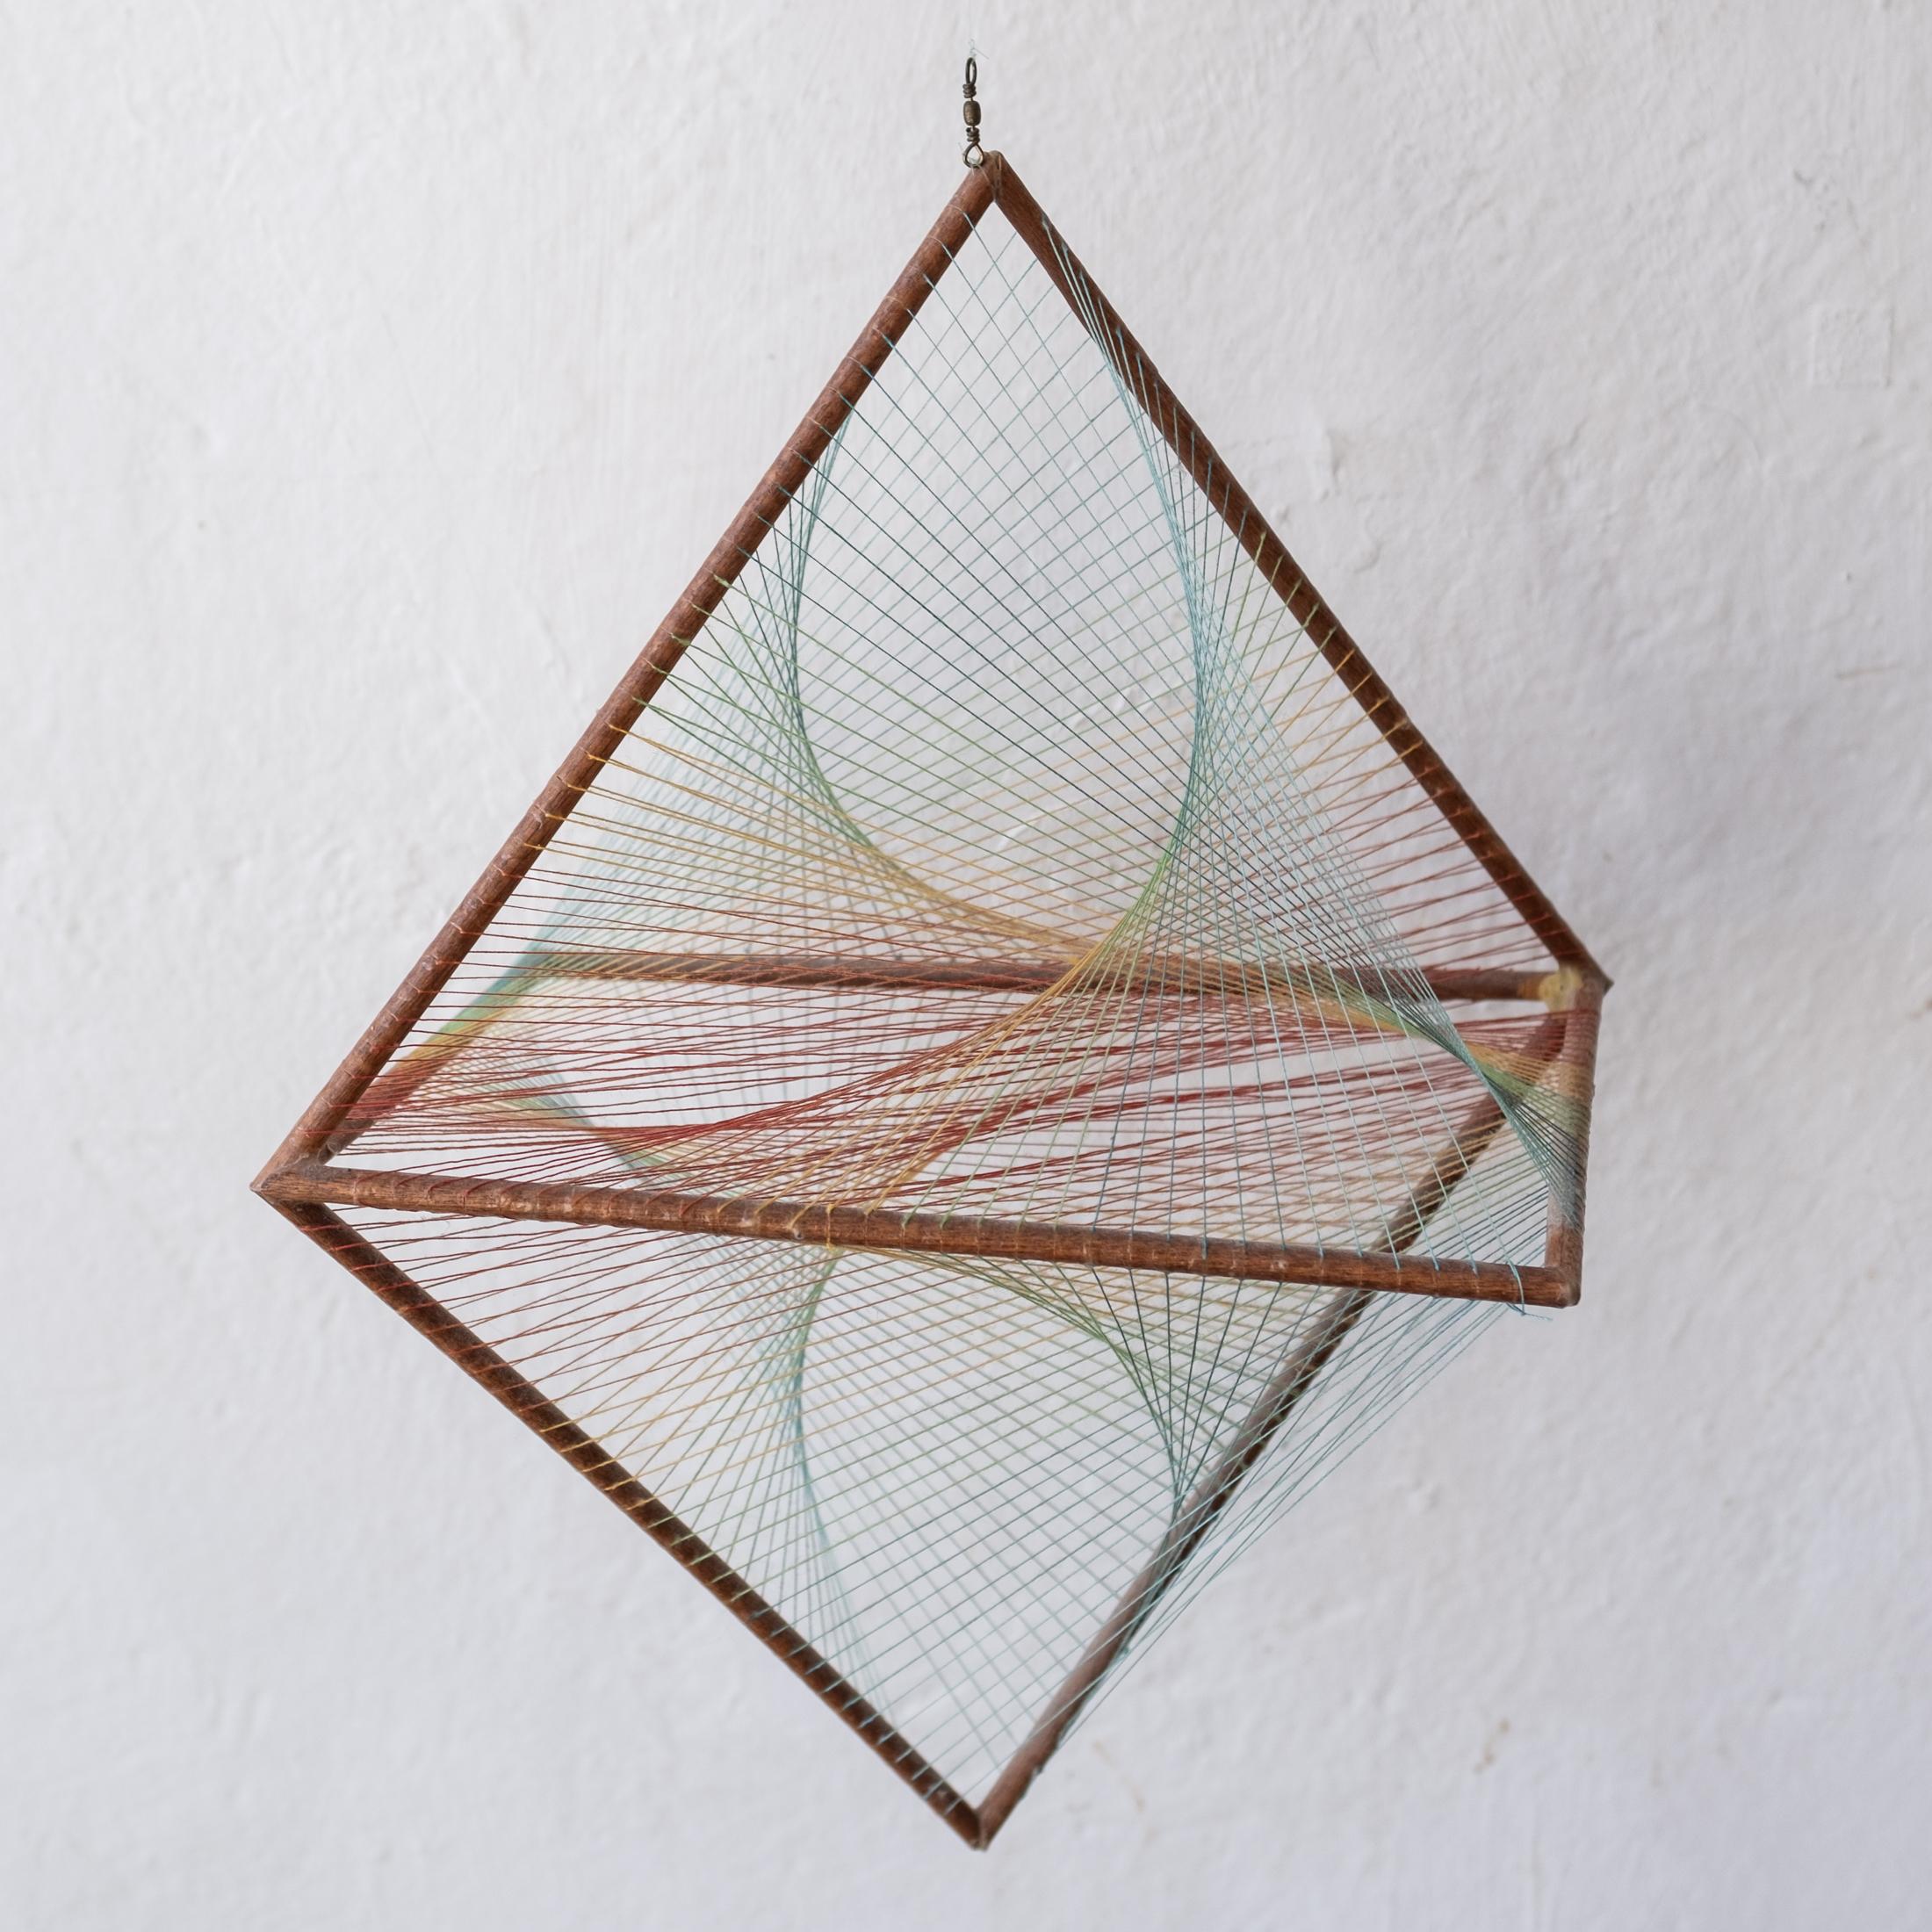 Hanging Mid Century Fiber and Wood Kinetic Sculpture 1960s In Good Condition For Sale In San Diego, CA